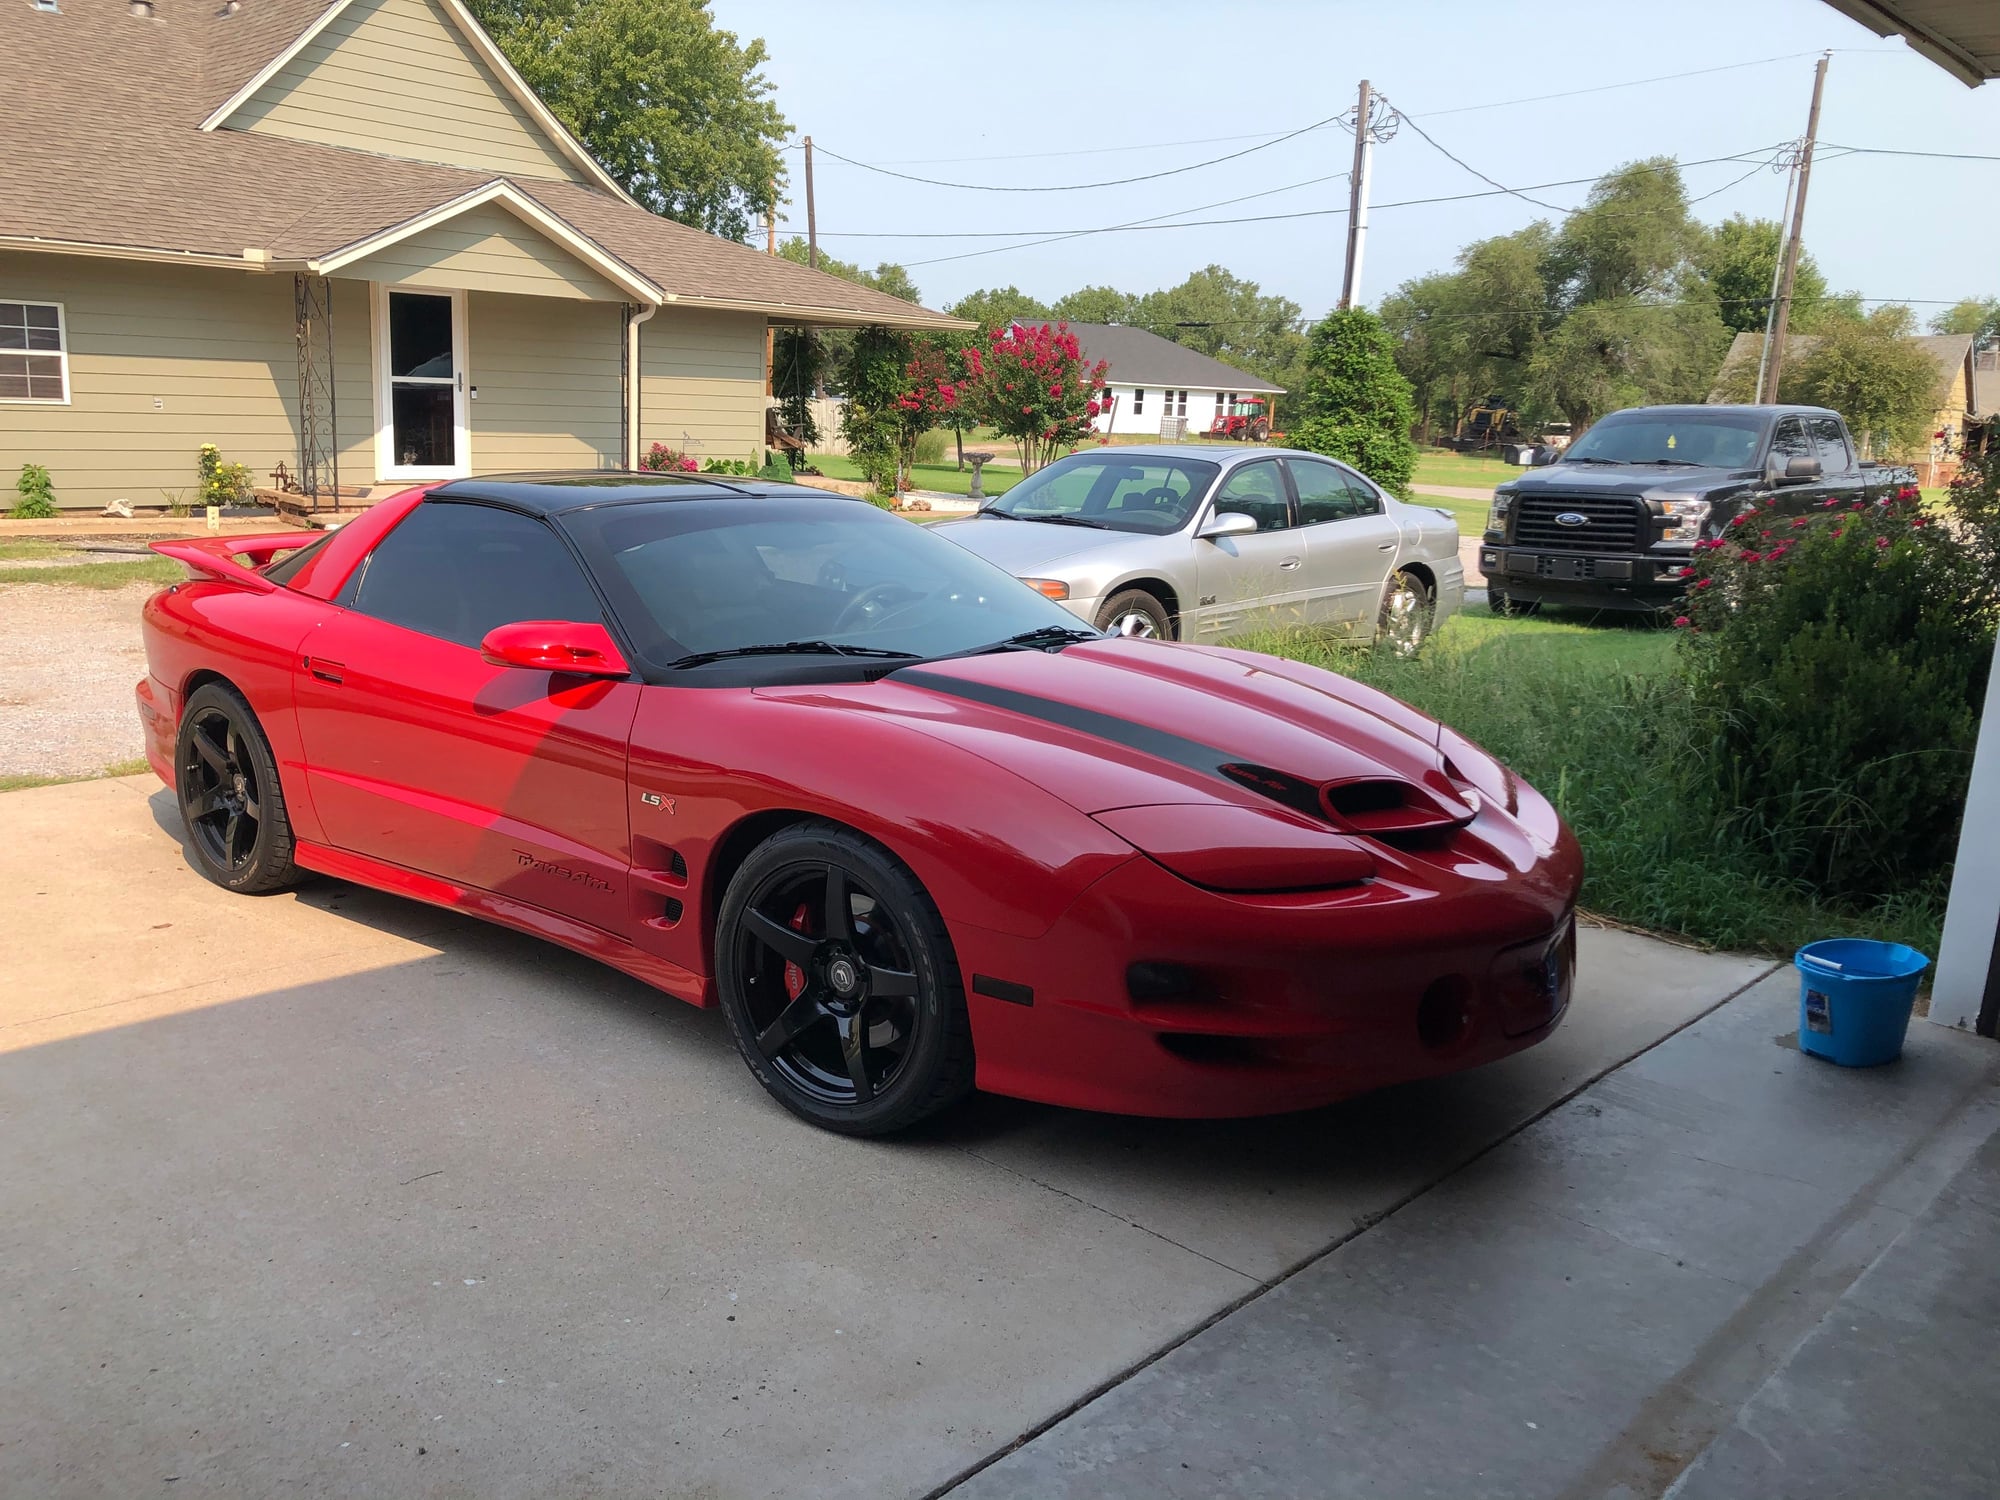 1998 Pontiac Firebird - 1998 Trans Am WS6, 465hp 37k miles CLEAN!!!! - Used - VIN 1234566788 - 37,000 Miles - 8 cyl - 2WD - Manual - Red - Enid, OK 73703, United States